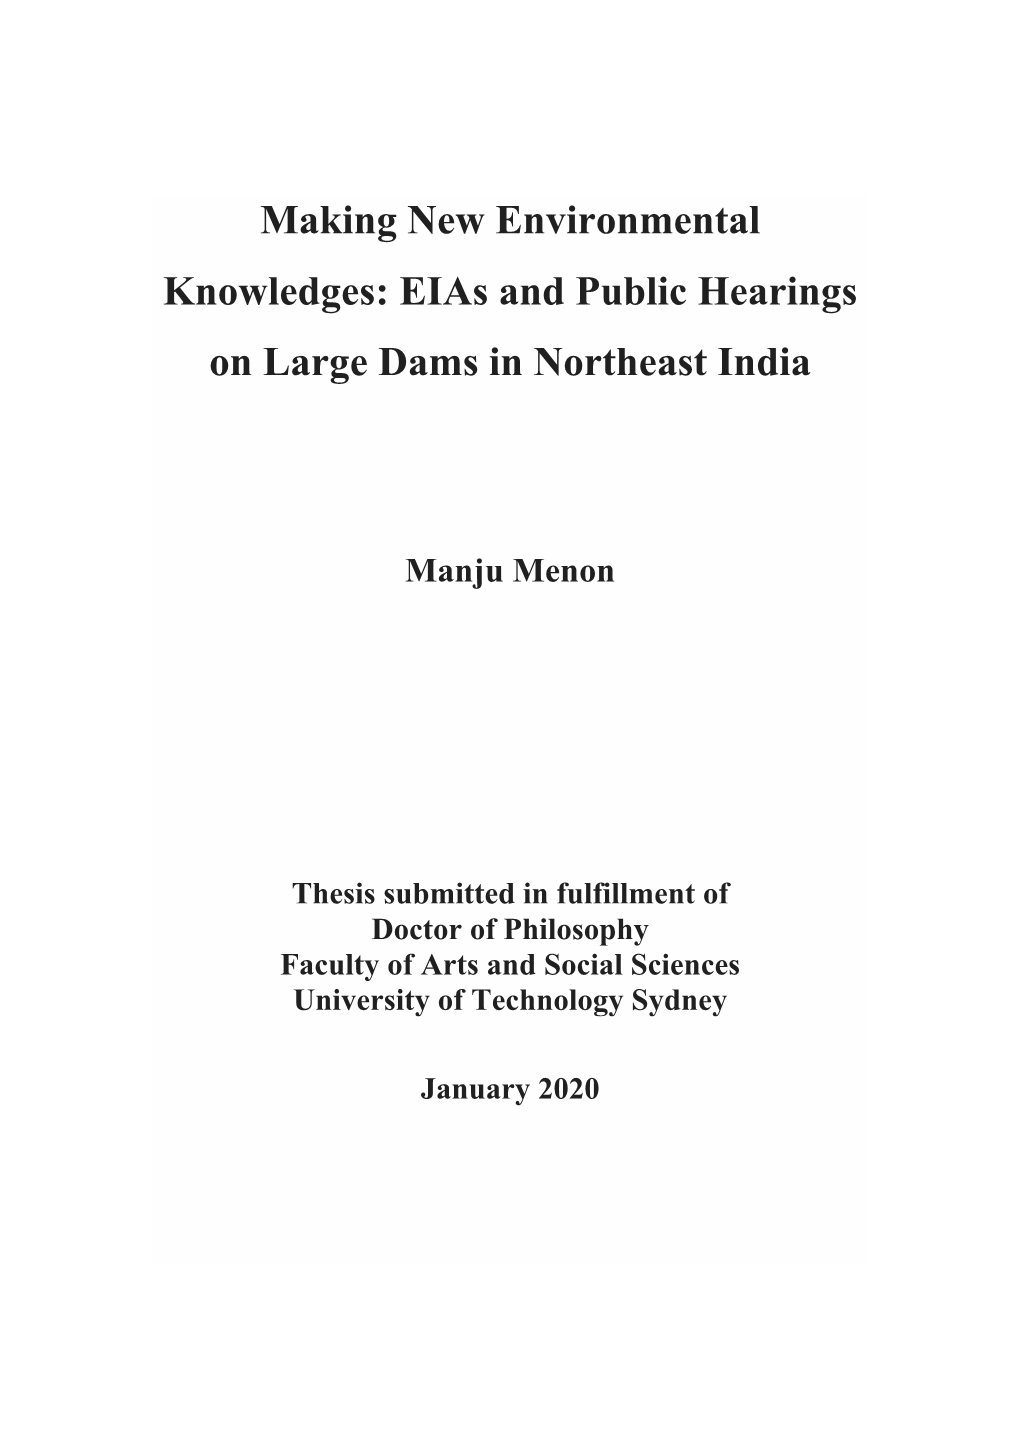 Eias and Public Hearings on Large Dams in Northeast India